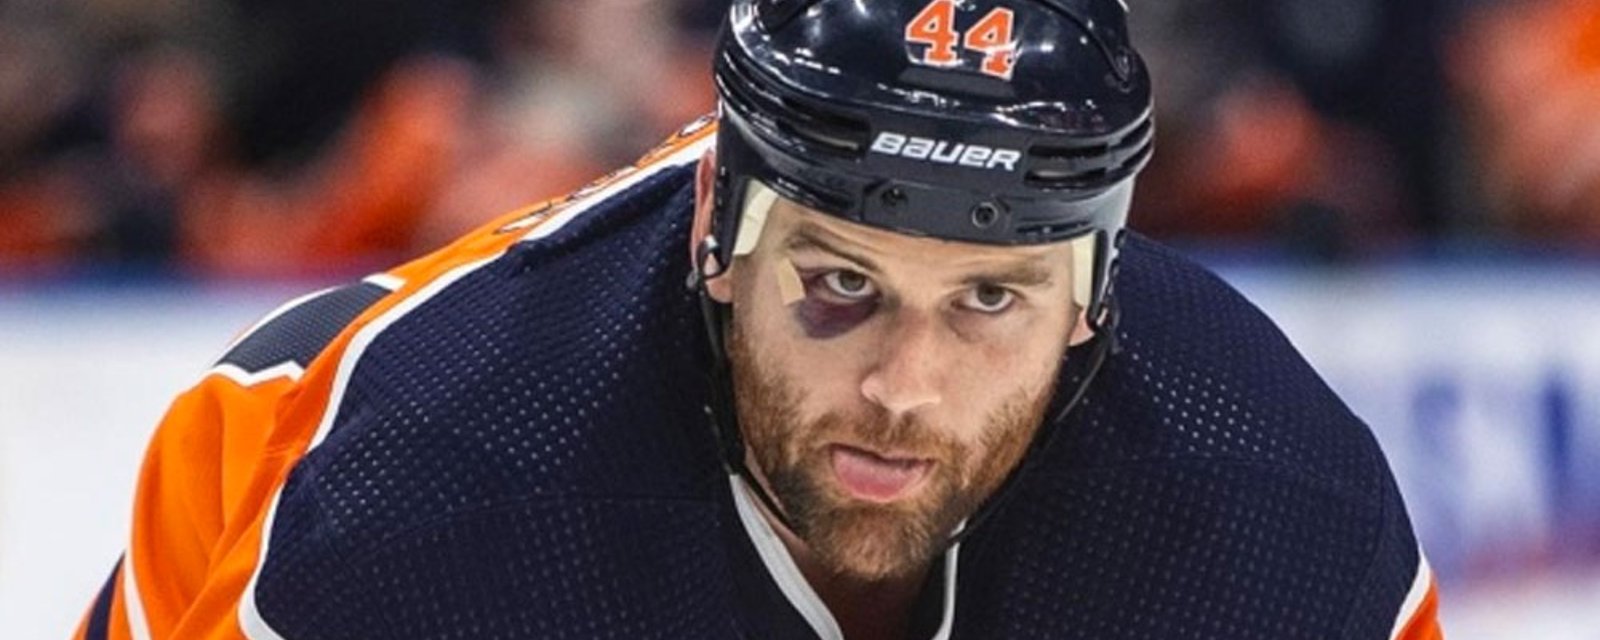 Zack Kassian signs a professional tryout (PTO) contract